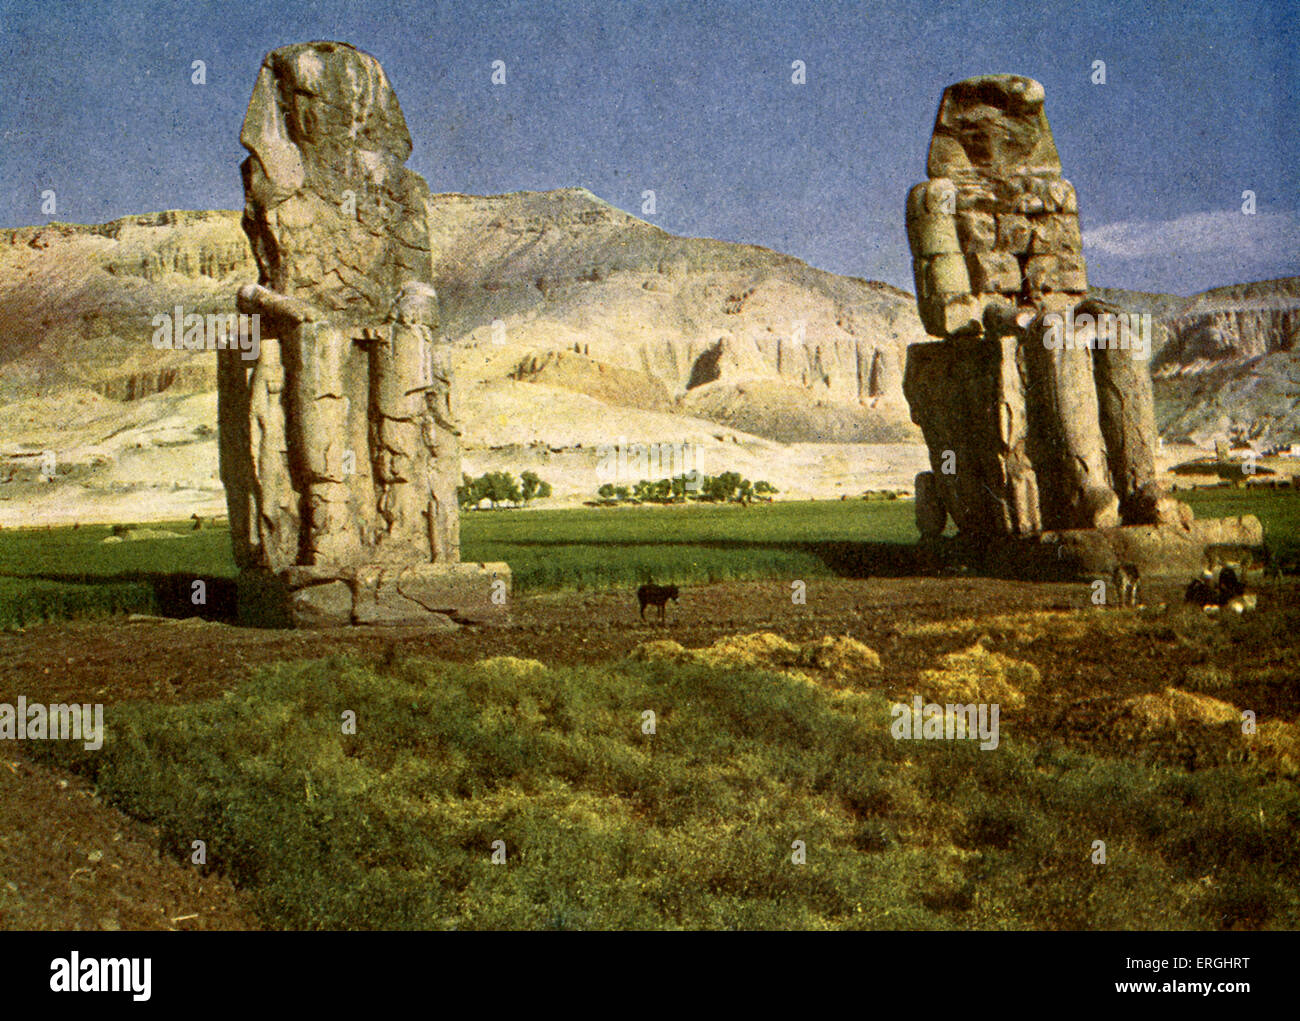 The Colossi of Memnon, near Thebes, Egypt.   Stone statues of Pharaoh Amenhotep III. Stock Photo